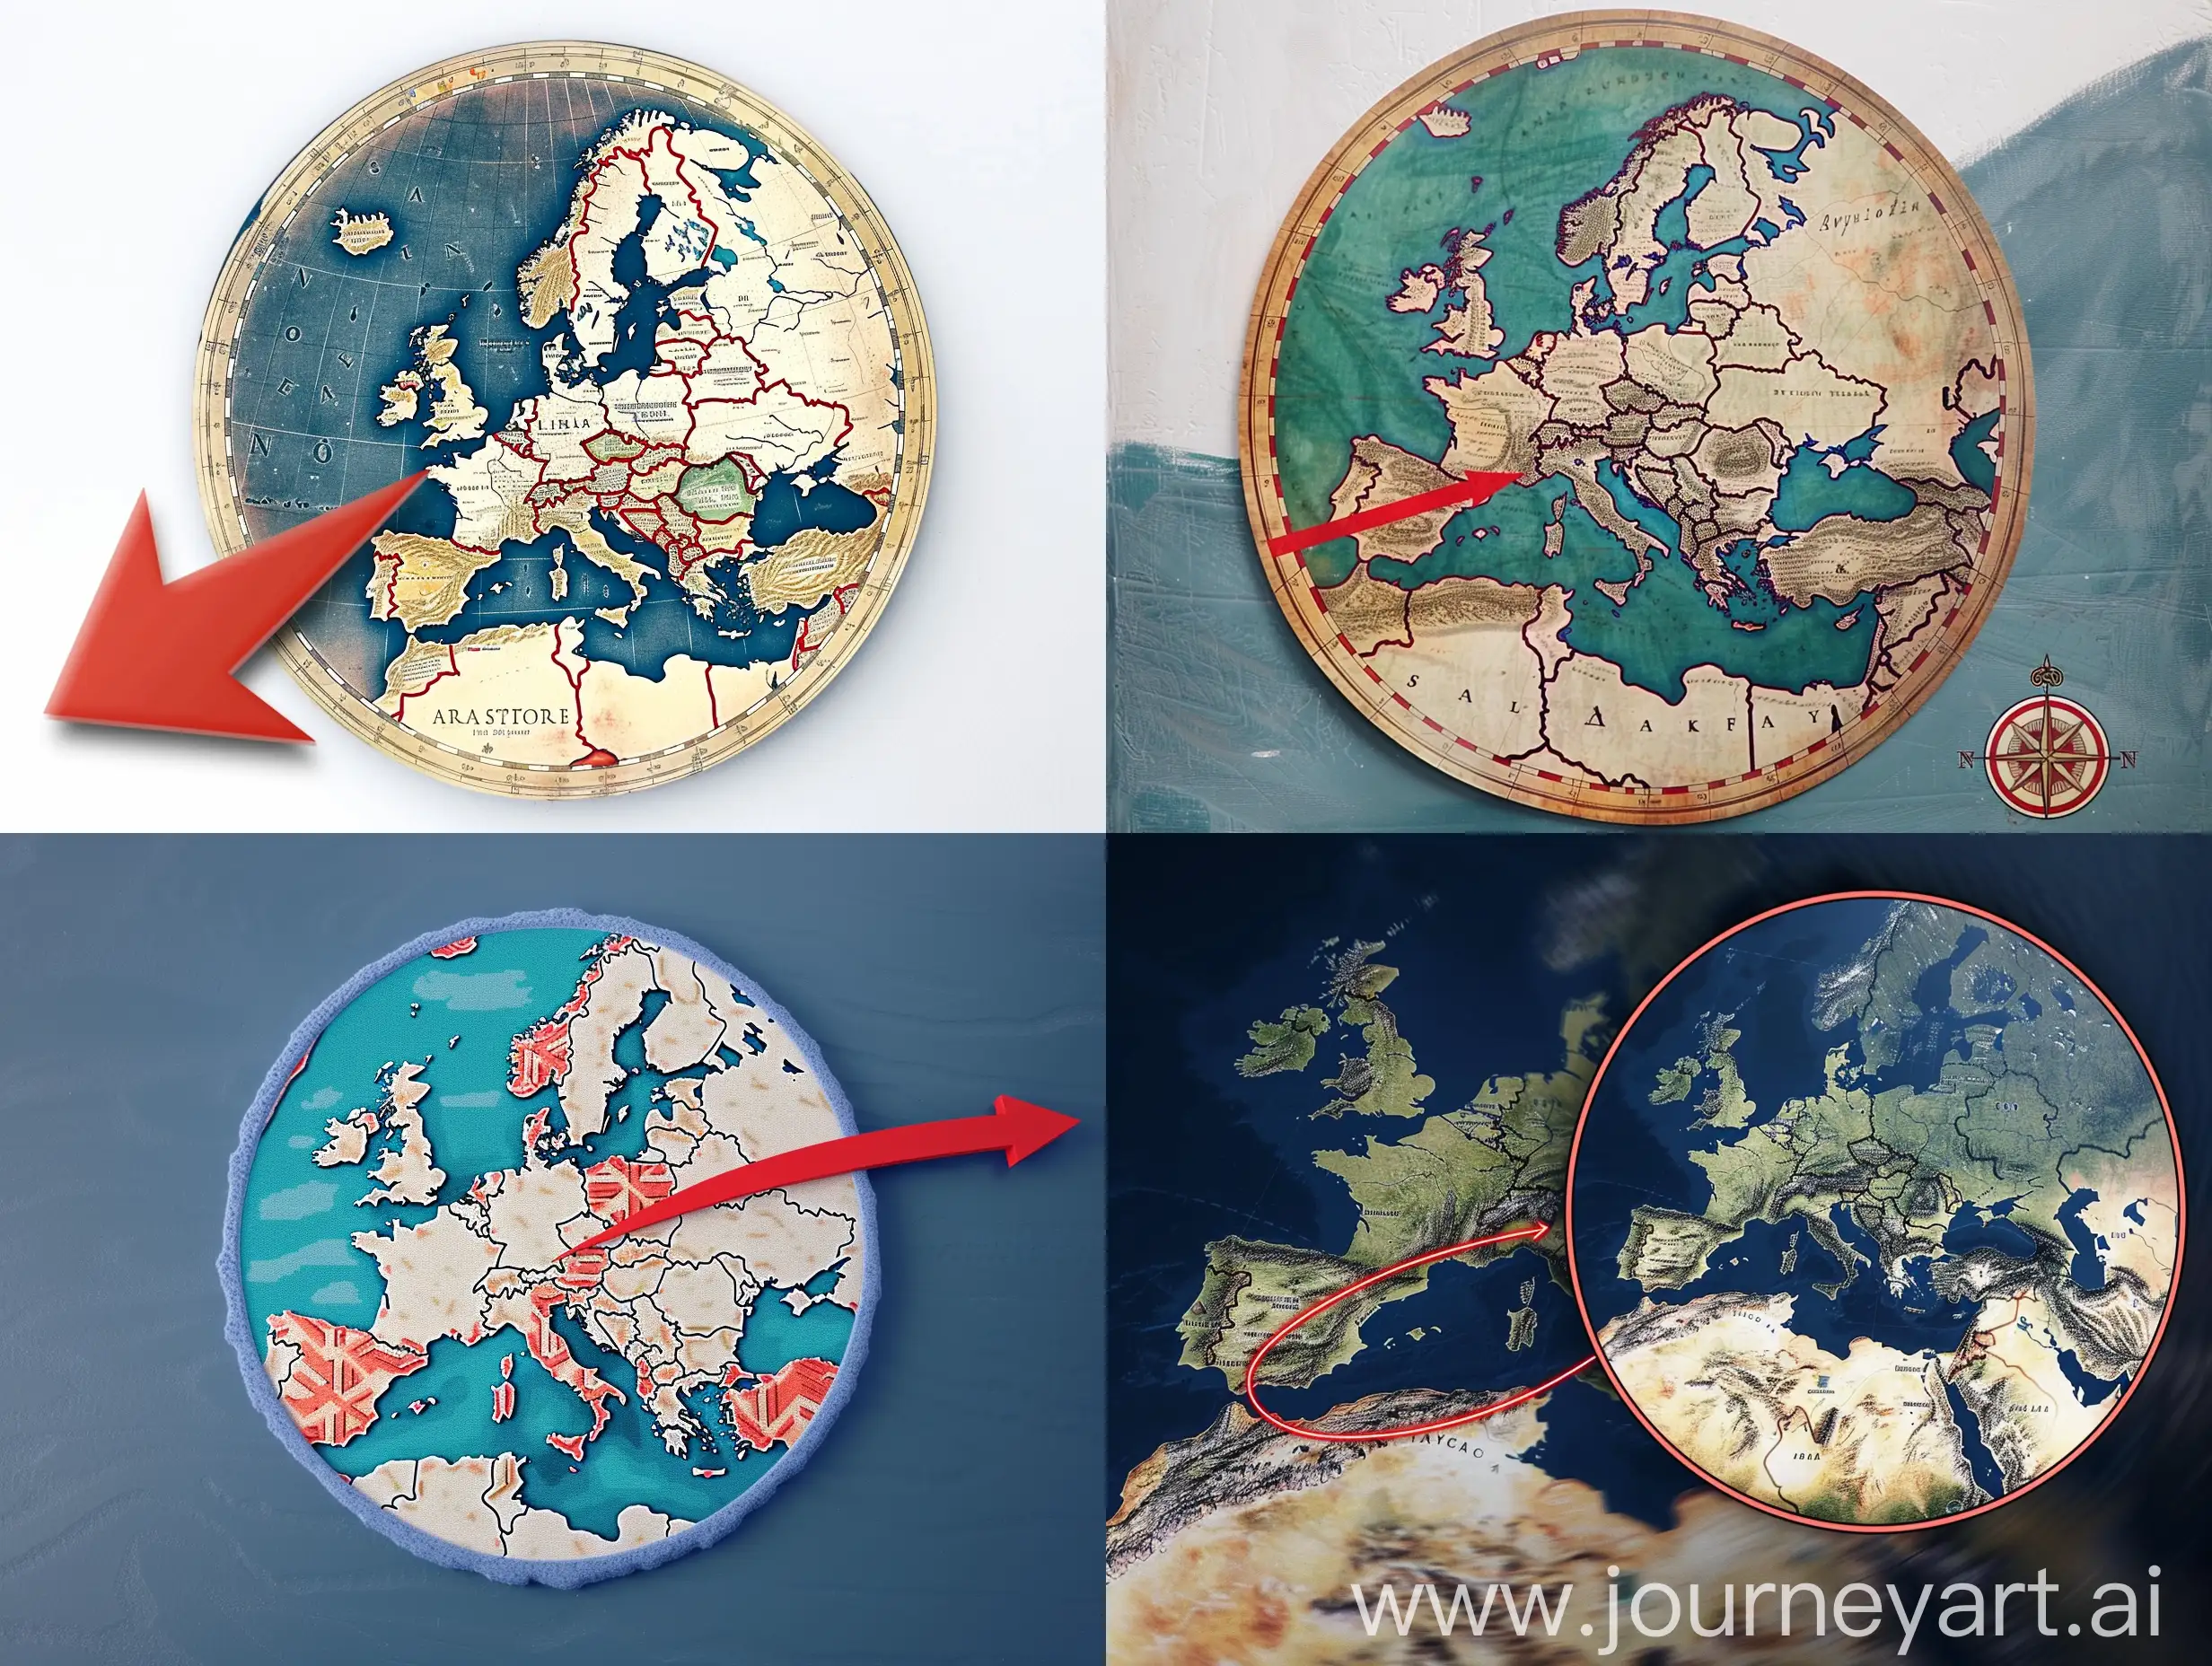 Circular-Map-of-Europe-with-Red-Arrow-Geographic-Navigation-Concept